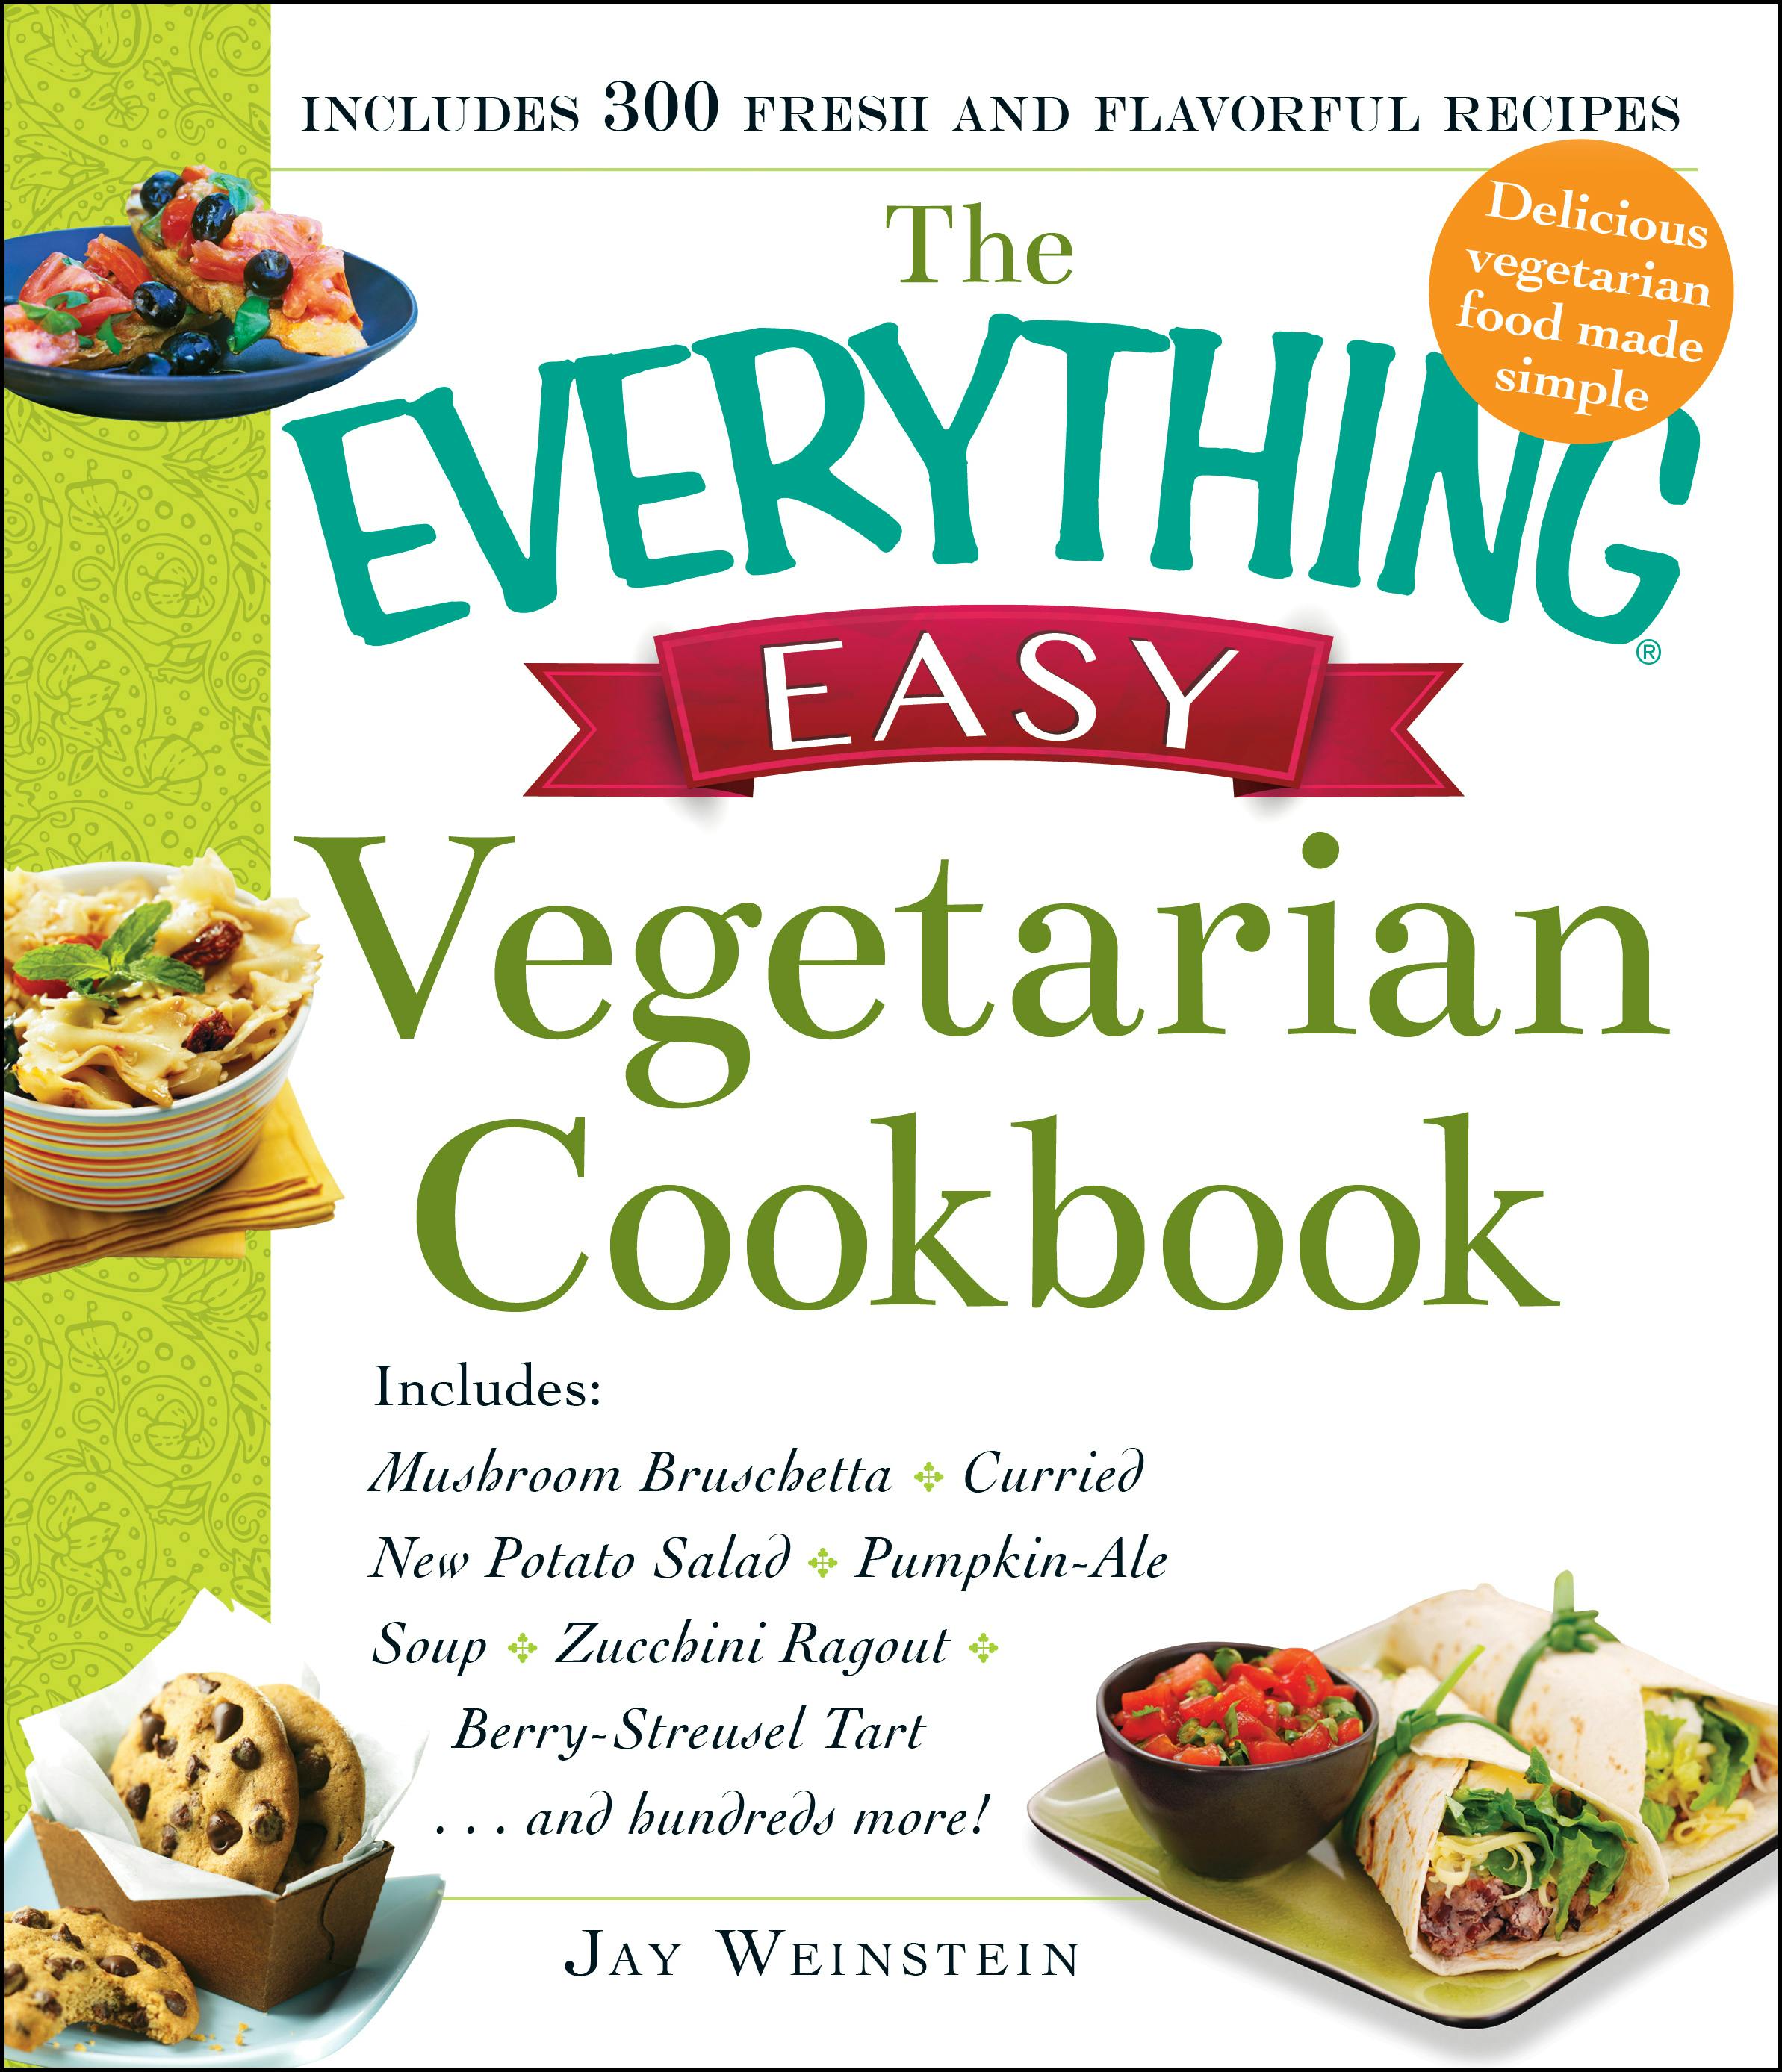 The Everything Easy Vegetarian Cookbook: Includes Mushroom Bruschetta, Curried New Potato Salad, Pumpkin-Ale Soup, Zucchini Ragout, Berry-Streusel Tart...and Hundreds More! - Jay Weinstein